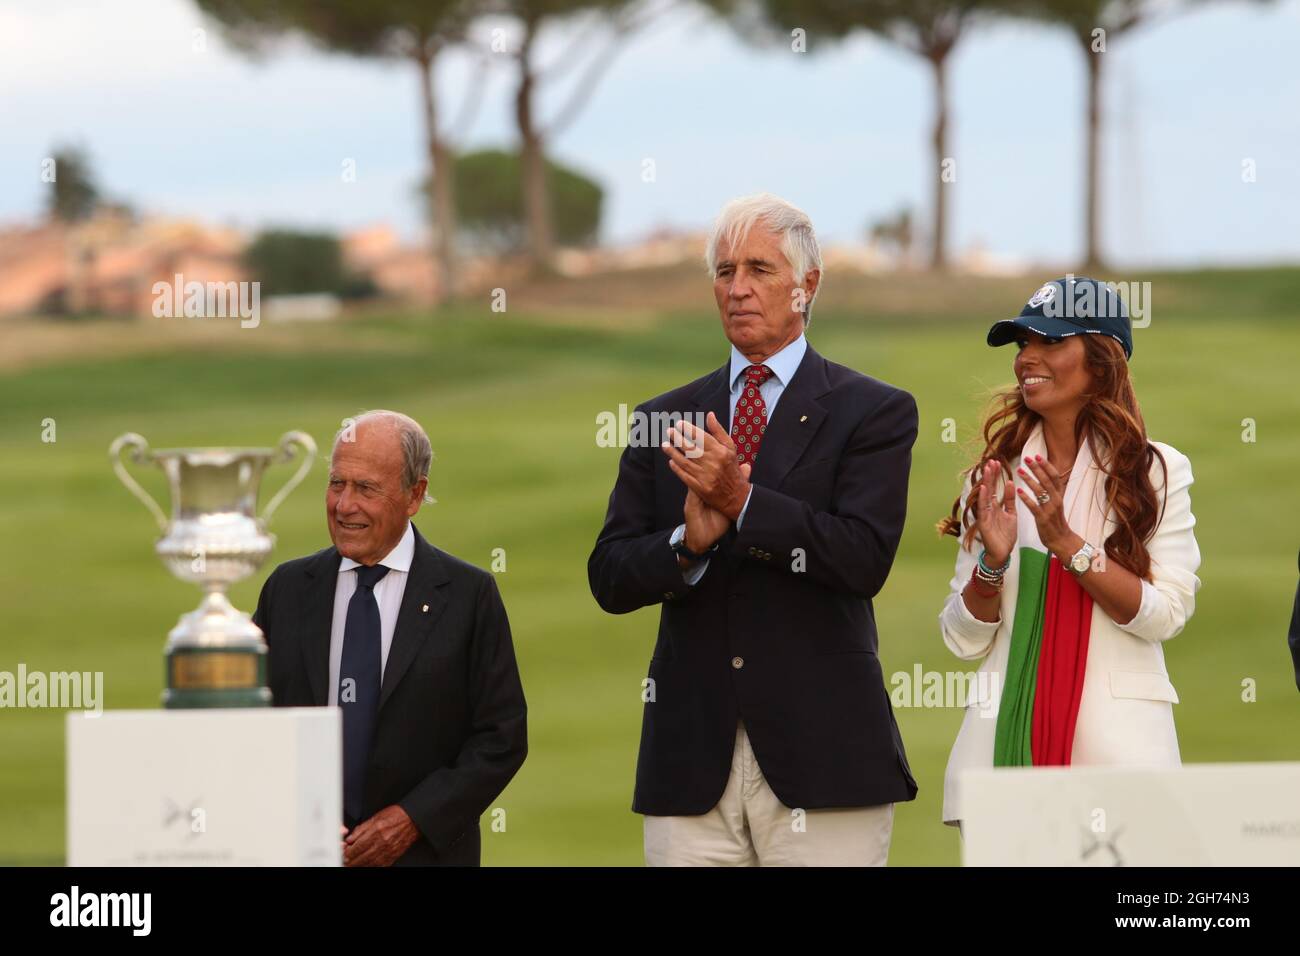 GIOVANNI MALAGO AND LAVINIA BIAGIOTTI DURING THE 2 ROUND OF THE DS AUTOMOBILES 78TH ITALIAN GOLF OPEN AT MARCO SIMONE GOLF CLUB ON SEPTEMBER 05, 2021 IN ROME ITALY Stock Photo